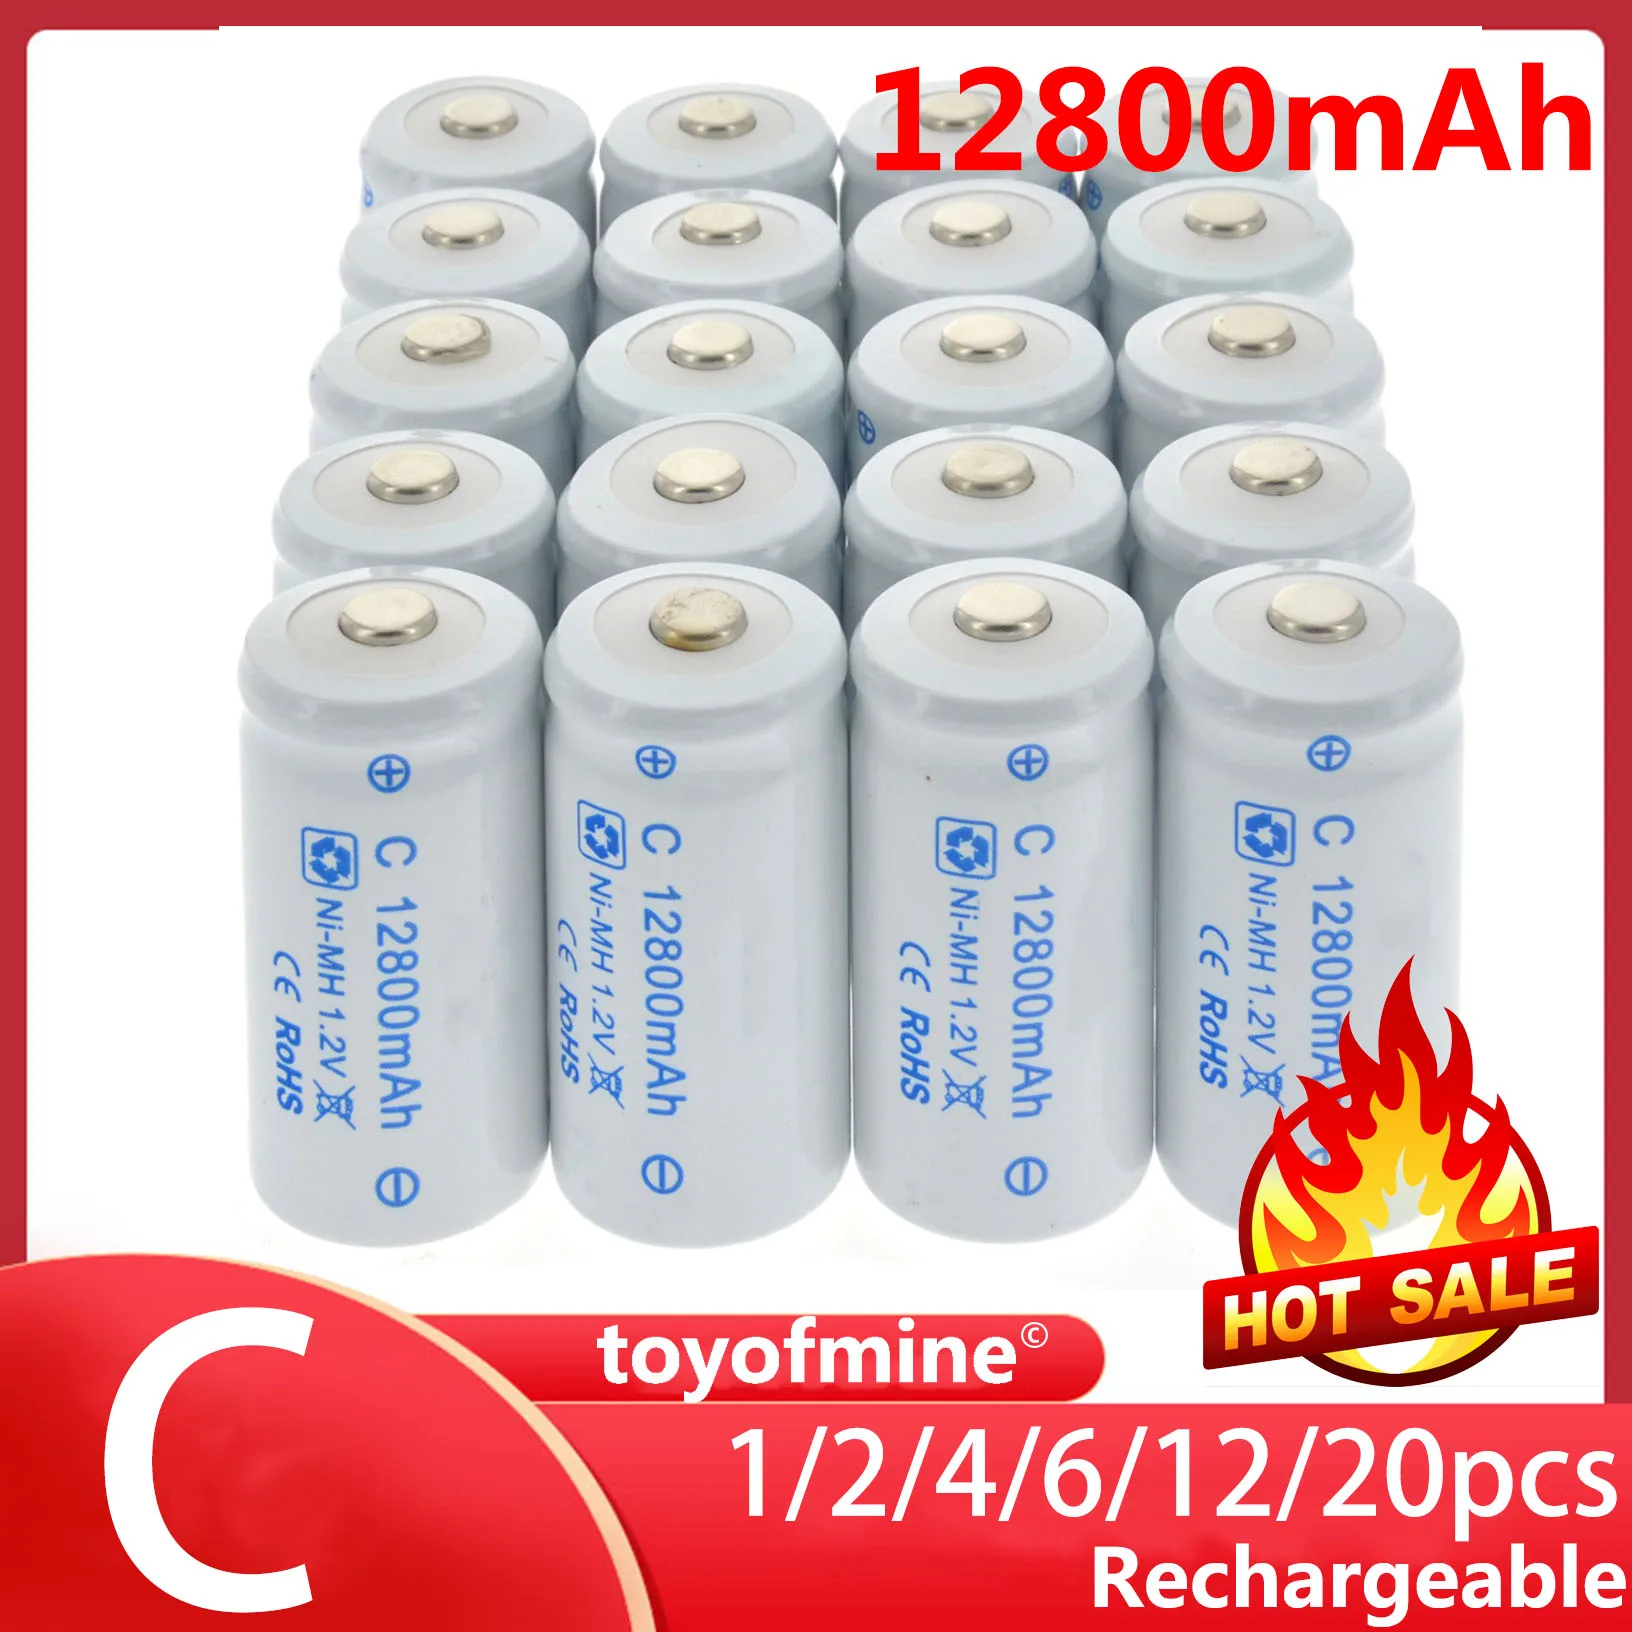 

1-20pcs 12800mAh C Size Rechargeable Batteries 1.2V R14 C Cell NI-MH Battery